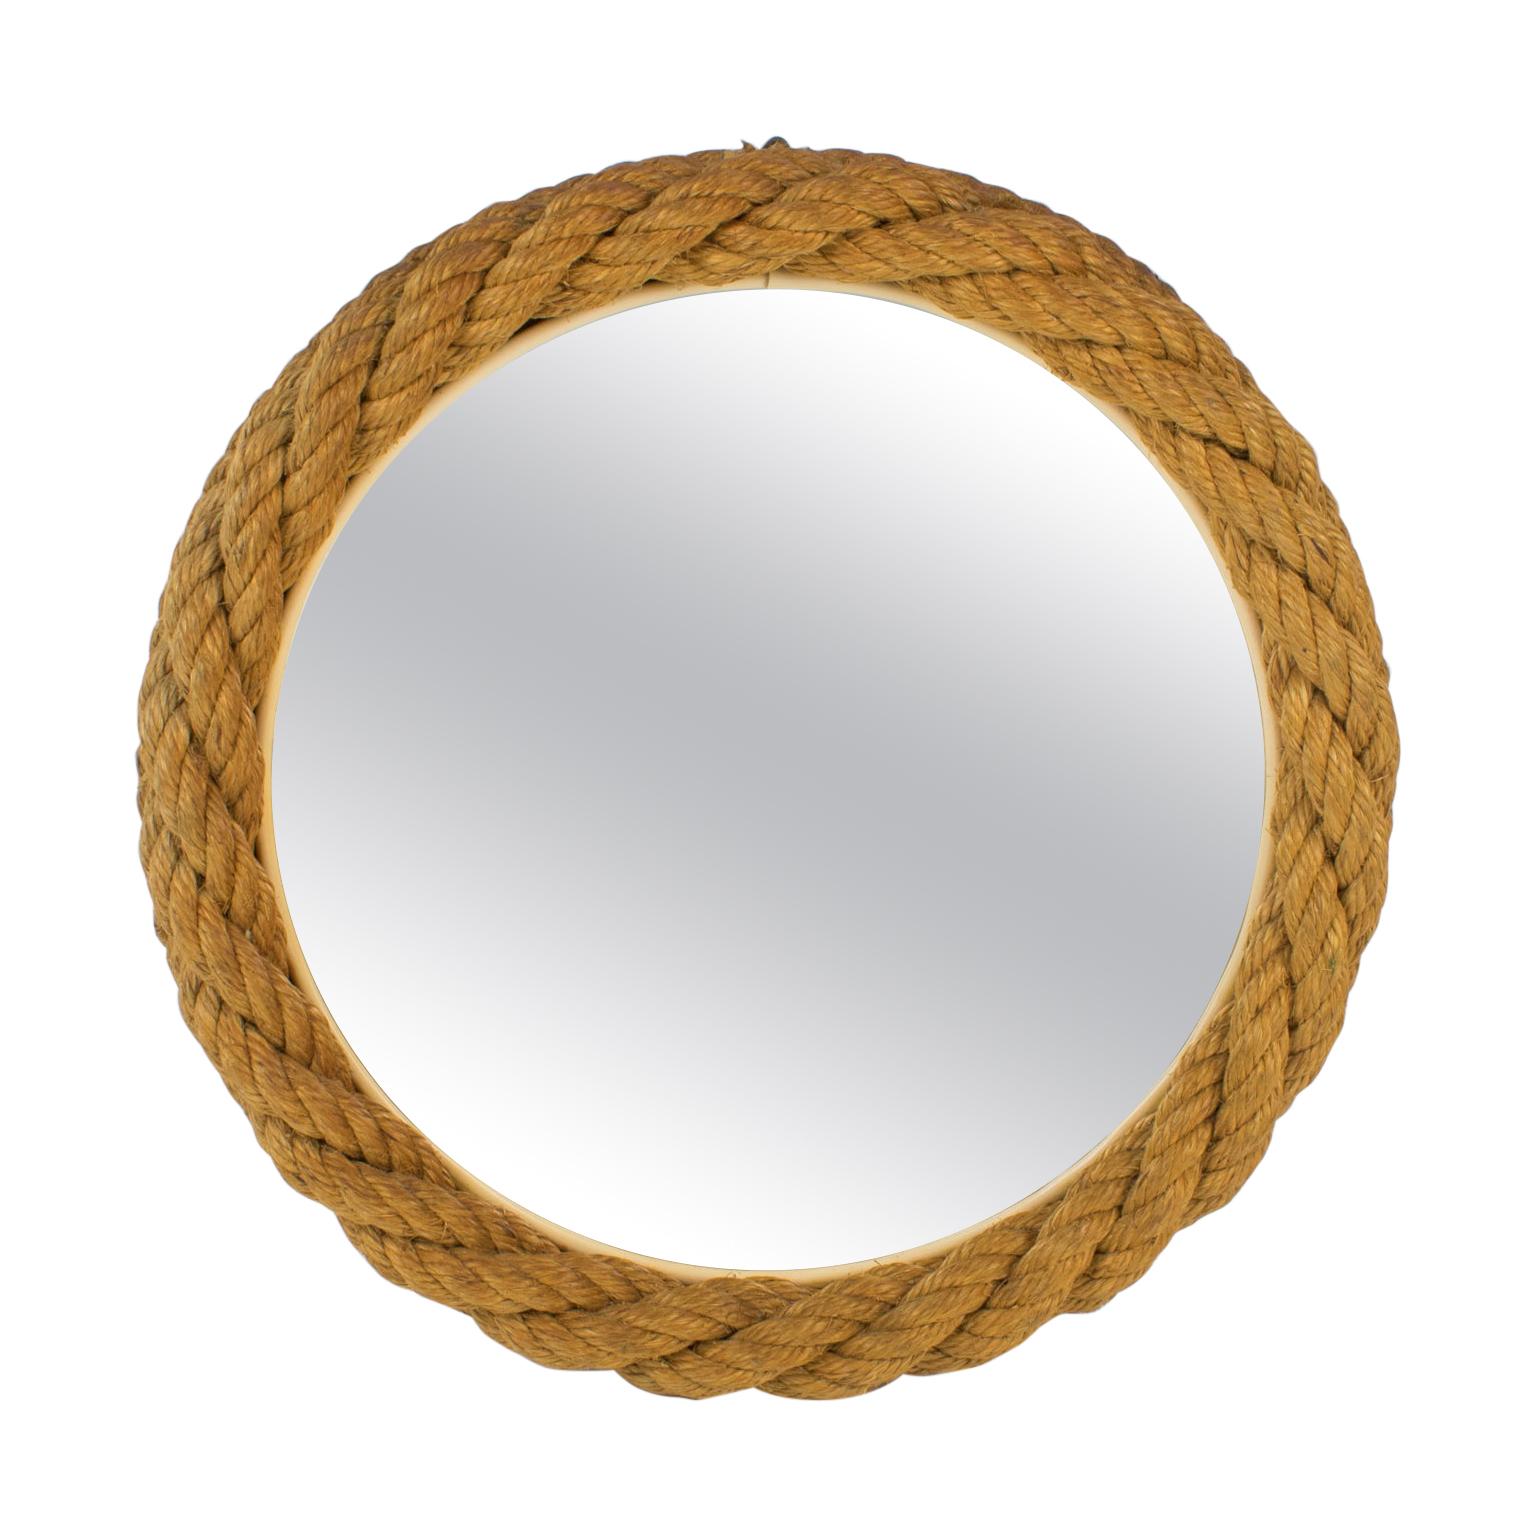 Audoux Minet 1960s Rope Wall Mirror